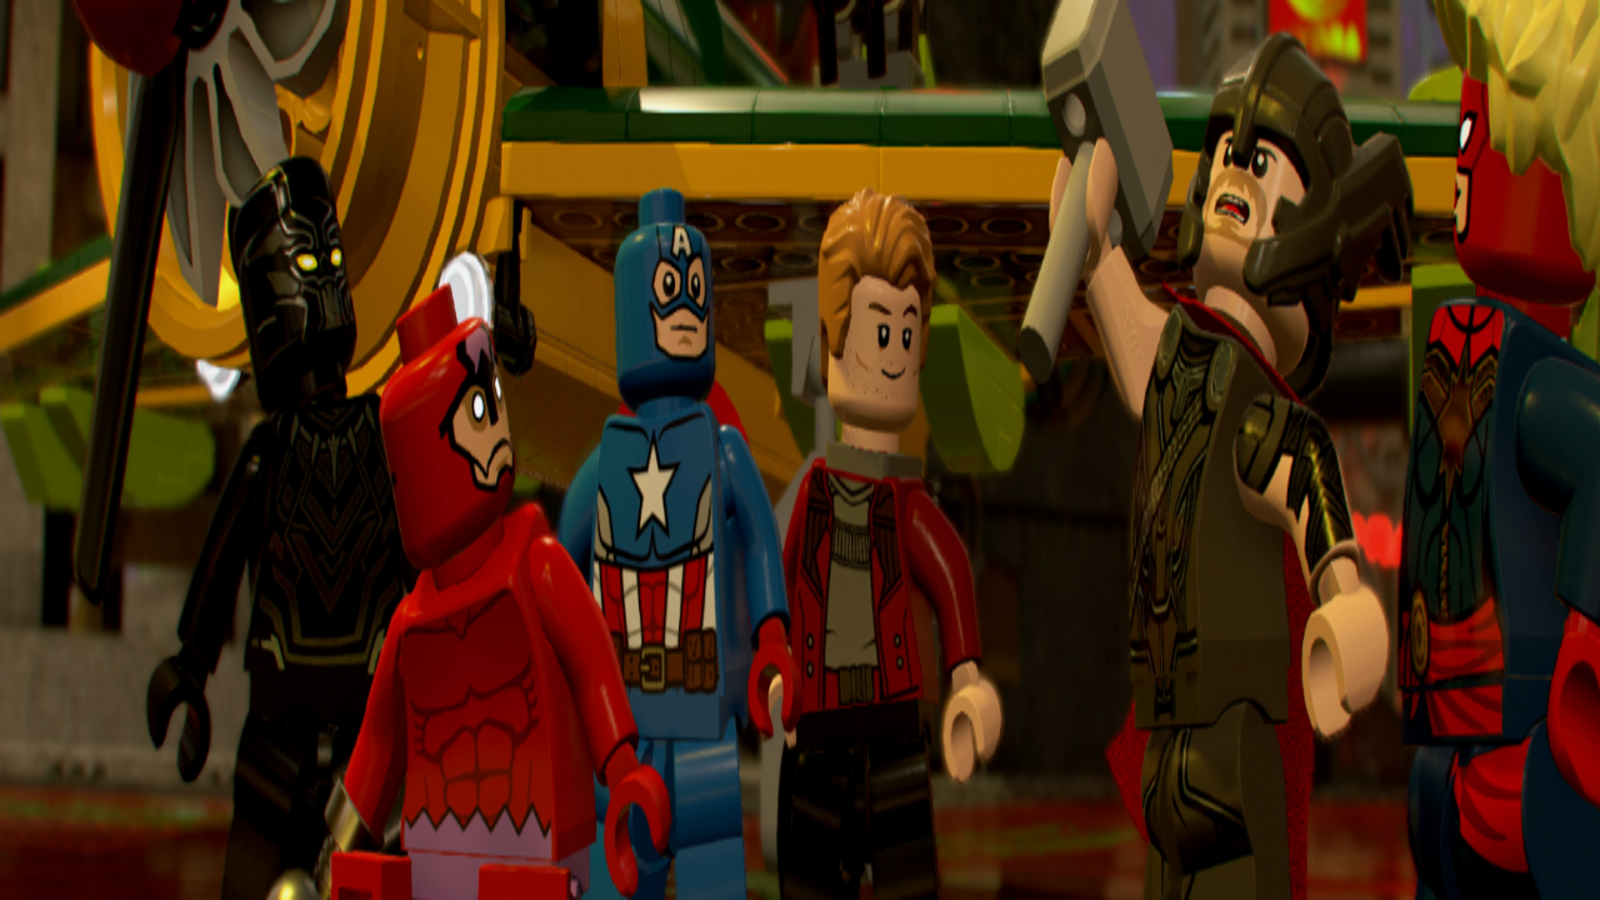 Is a Lego Marvel Superheroes 3 still a Possibility? : r/Marvel